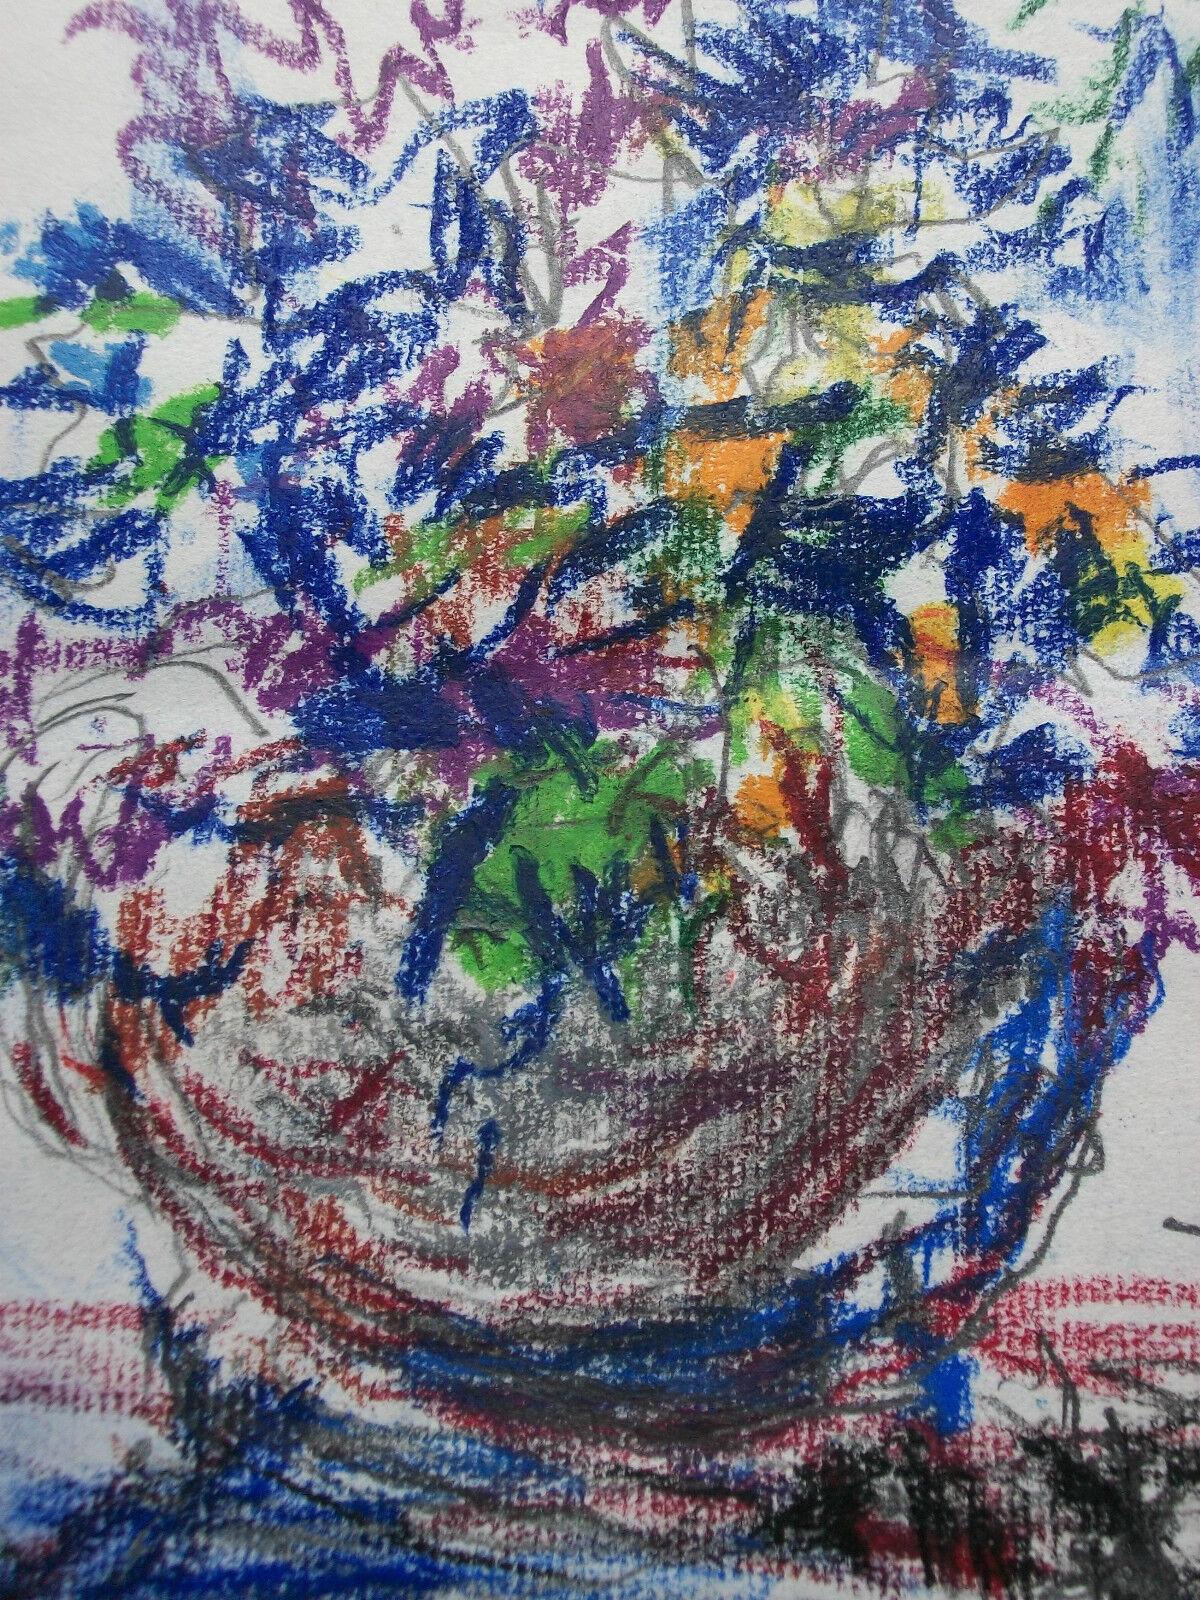 Hand-Crafted Expressionist Oil Pastel Still Life on Paper - Signed - Unframed - Circa 2005 For Sale